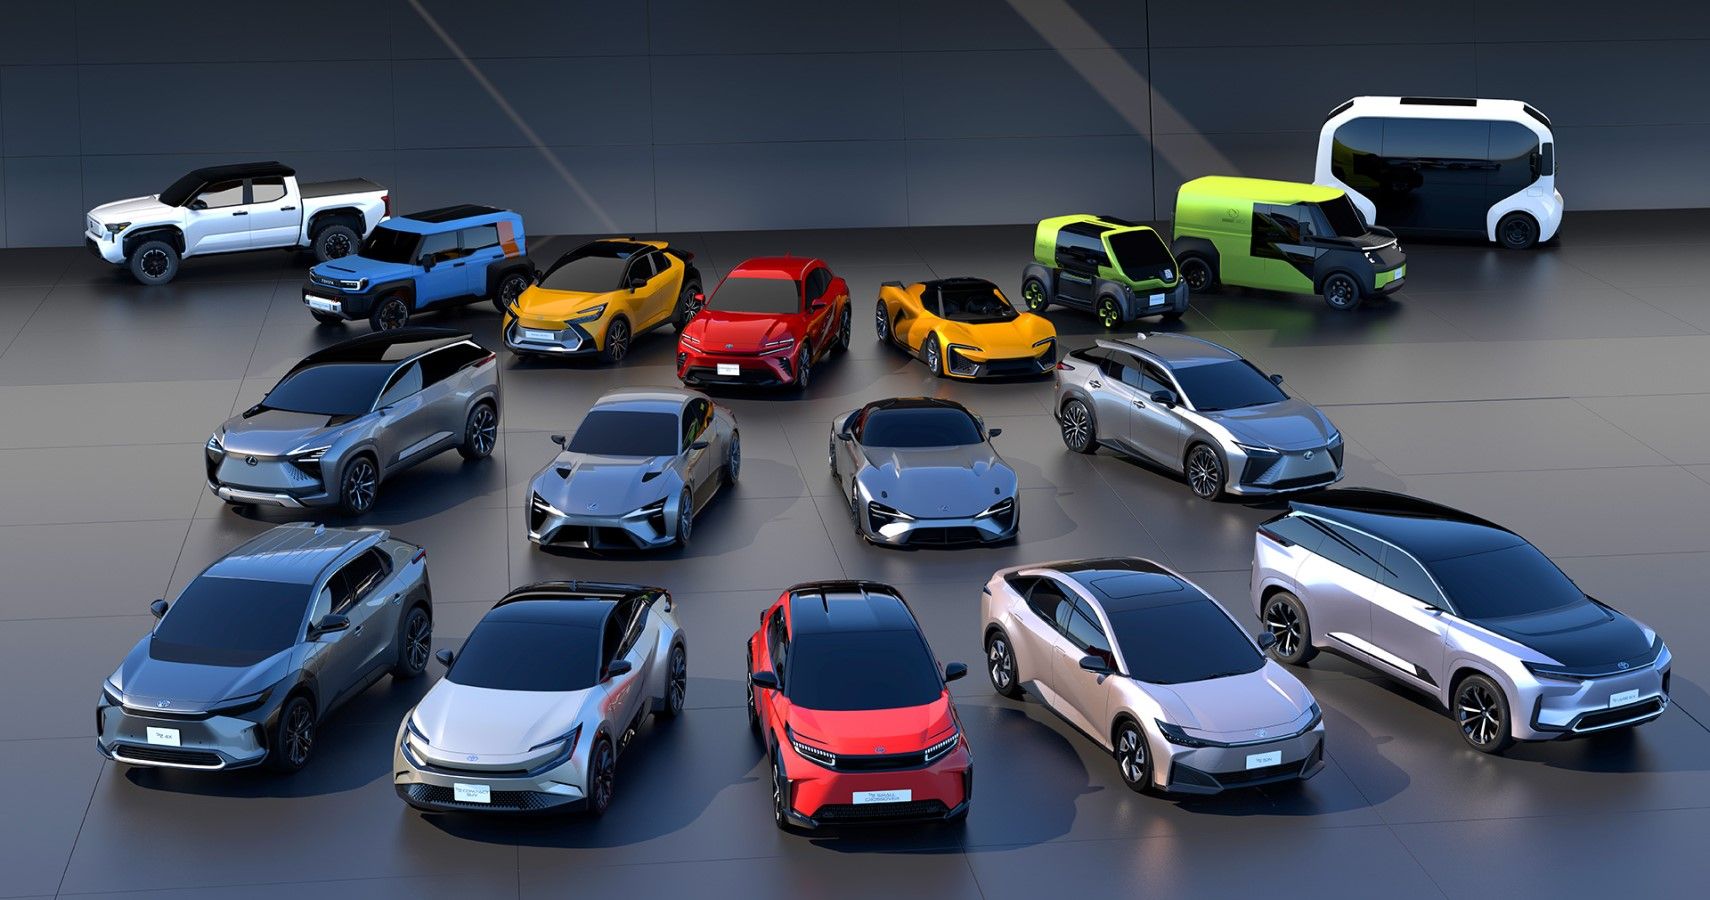 All of the showcased EVs by Toyota and Lexus